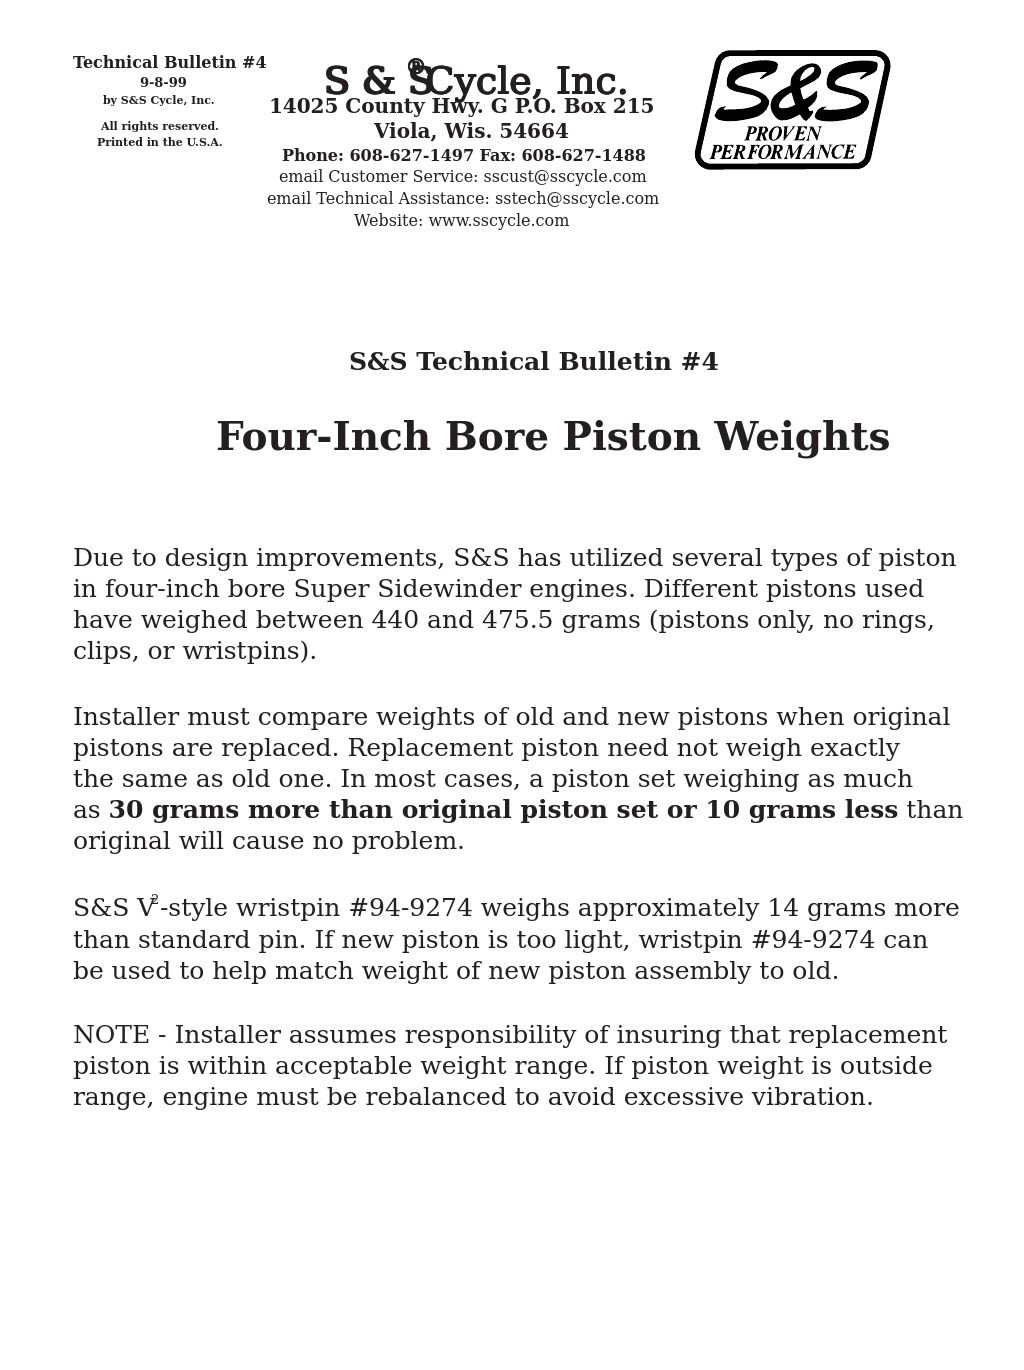 Four-Inch Bore Piston Weights